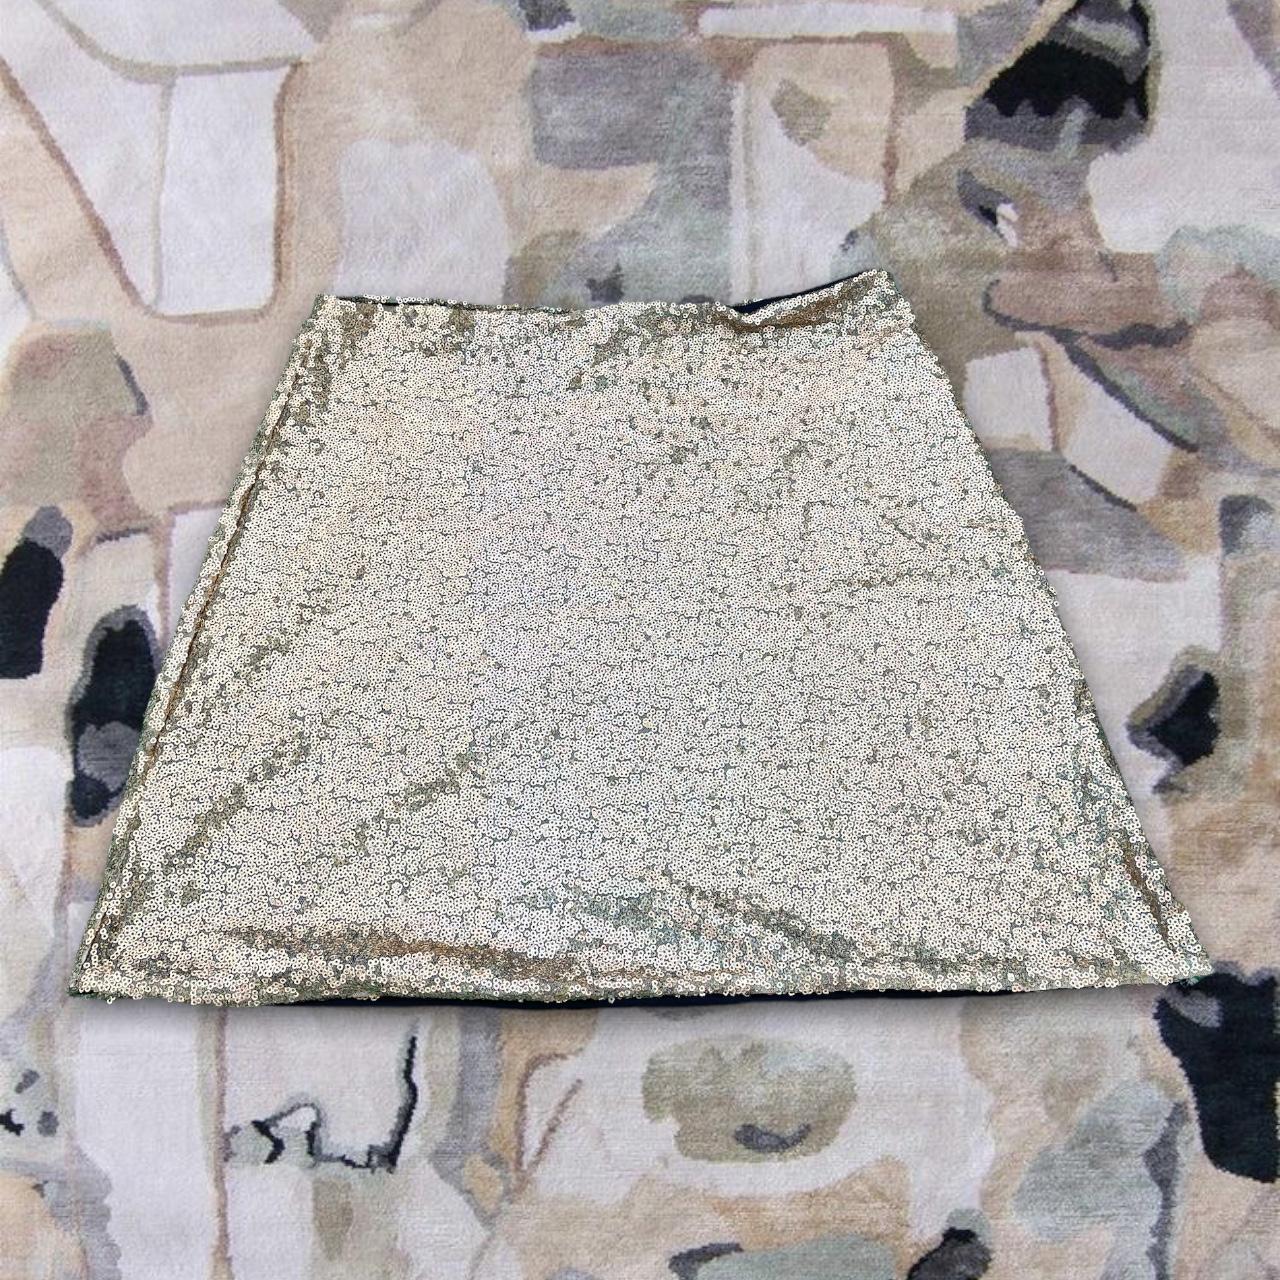 Product Image 1 - O-MIGHTY Sequin Skirt ✨
Great for